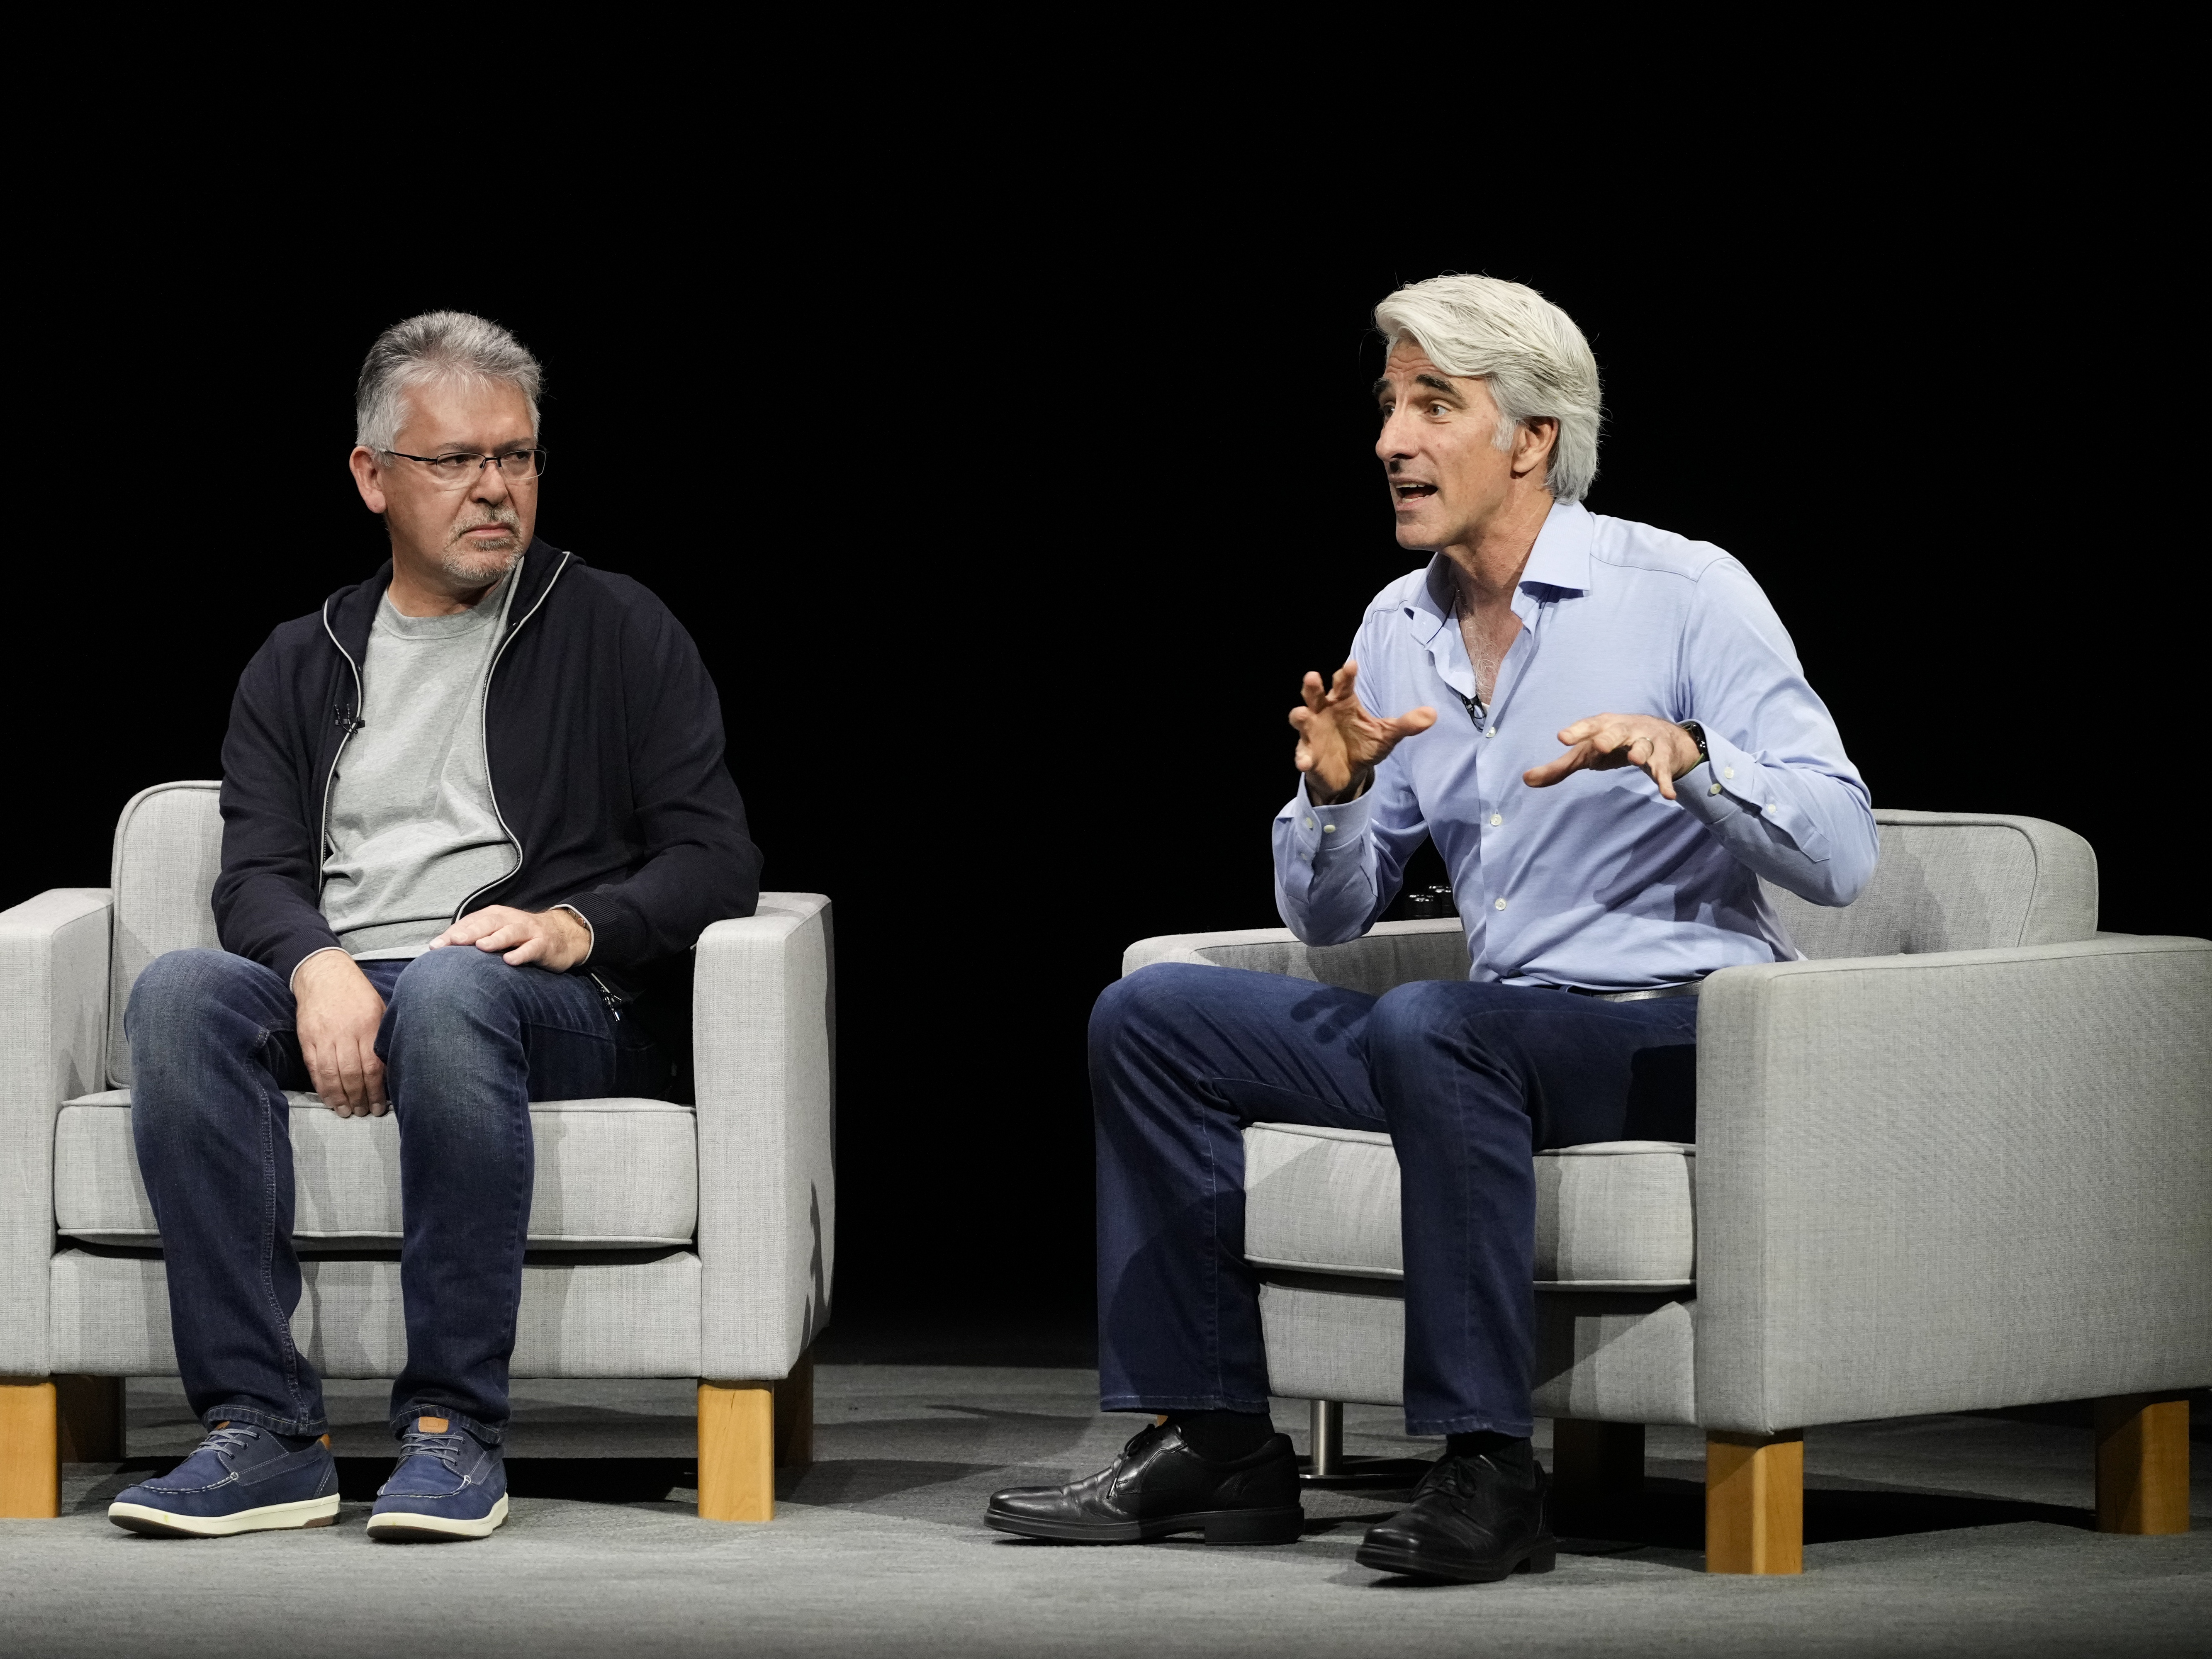 Apple software chief Craig Federighi, right, pictured with exec John Giannandrea, announced a partnership with OpenAI to bring AI features to its products. (AP Photo/Jeff Chiu)